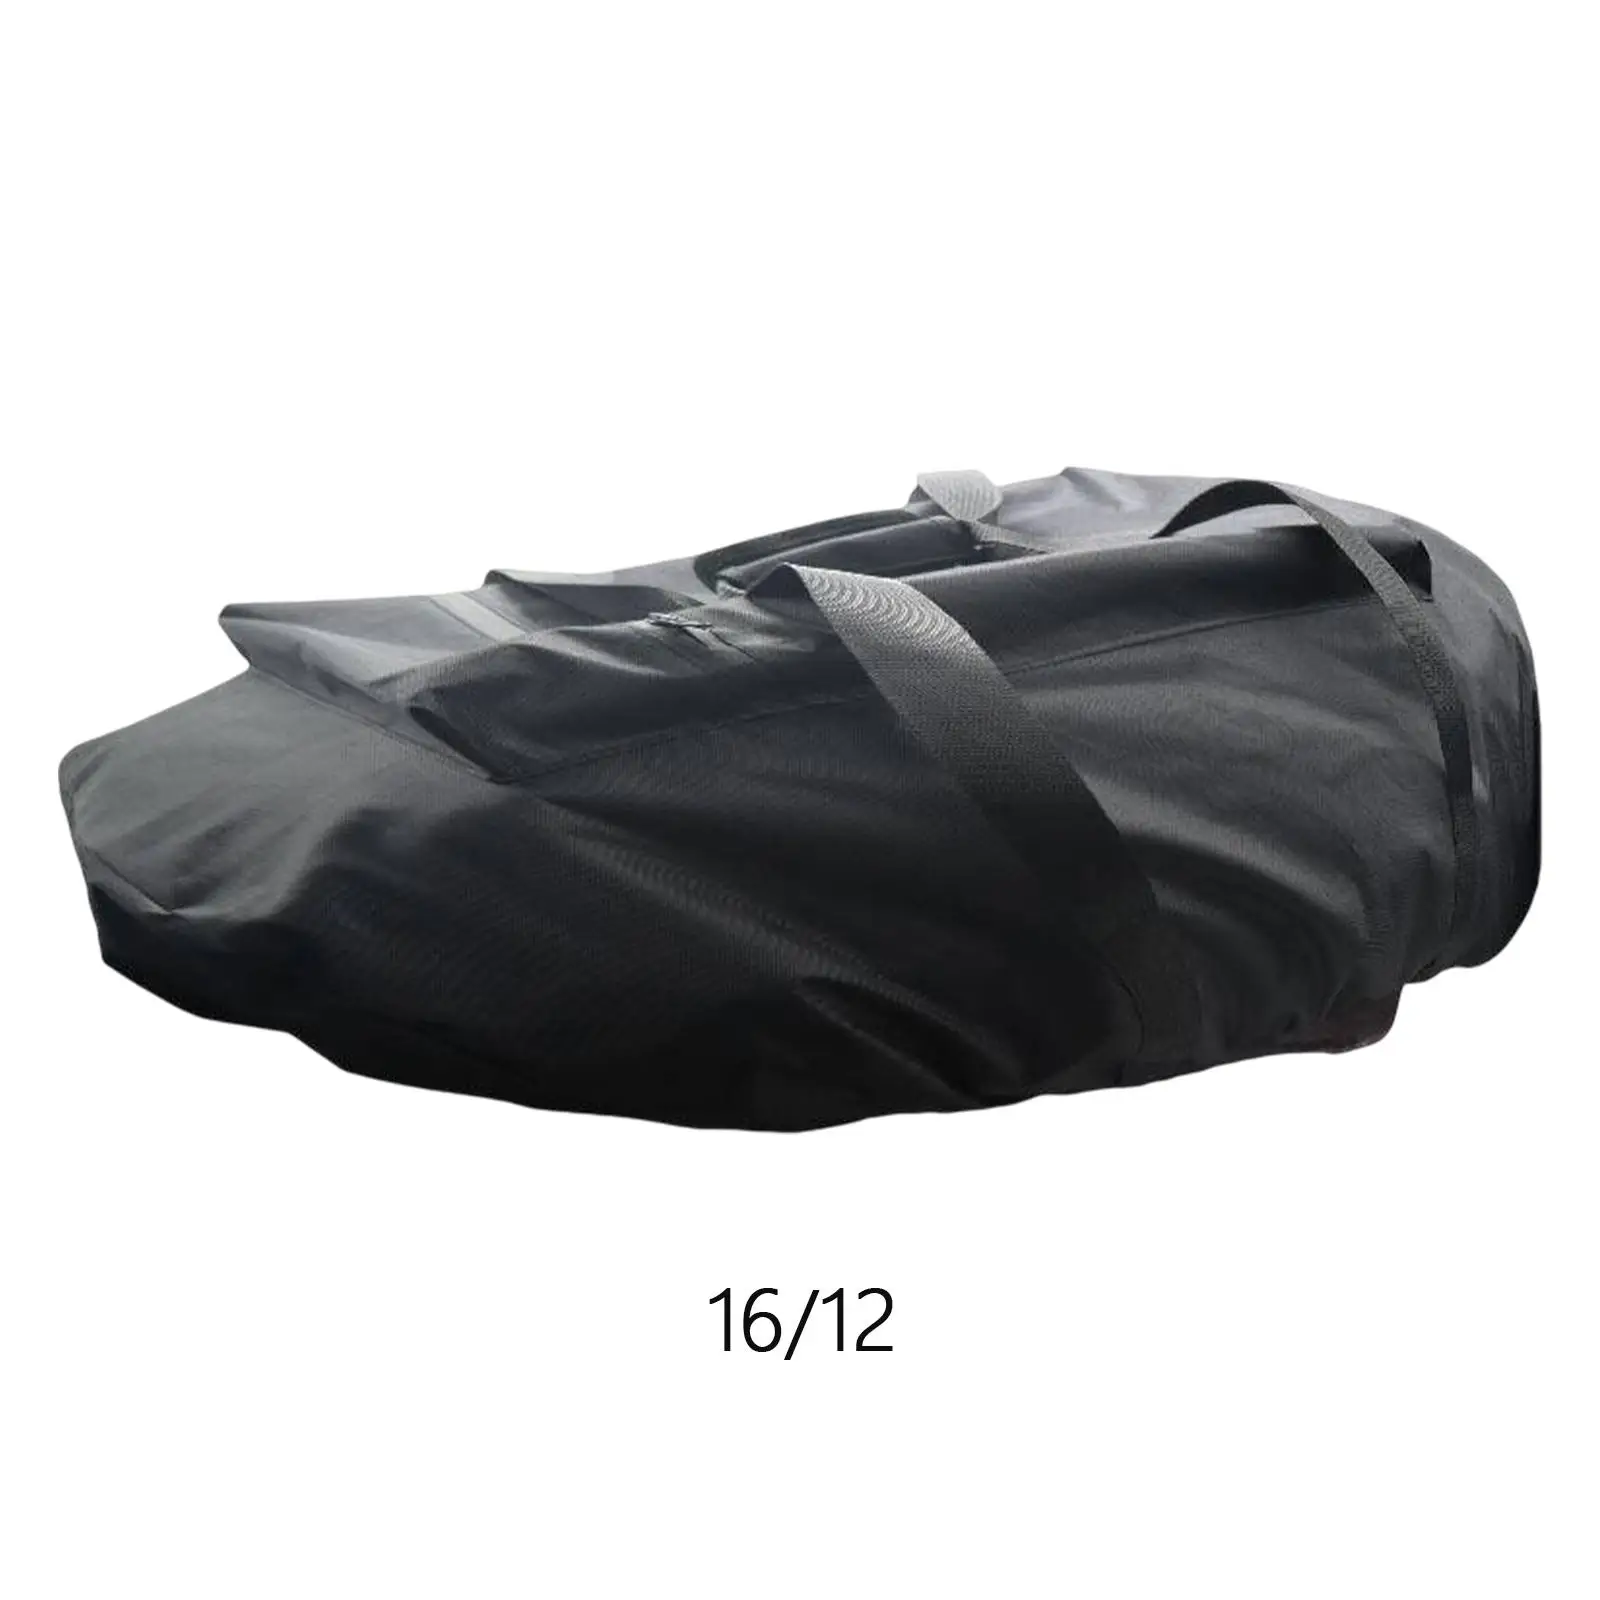 Pizza Oven Cover Protective Portable Durable Attachment Windproof High Strength Waterproof 600D Polyester Dustproof for Camping